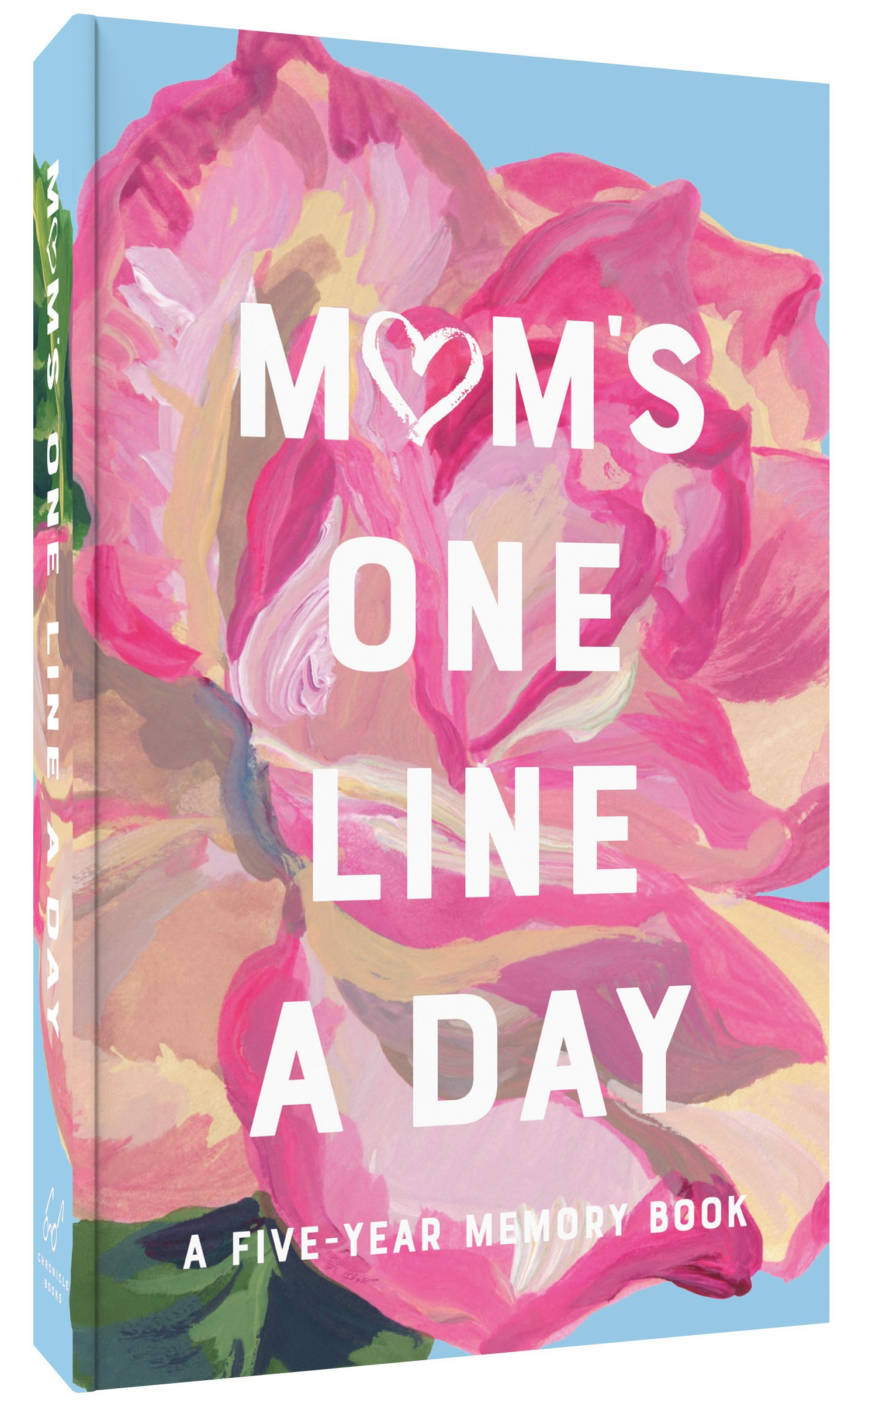 Moms One Line a Day: A Five-Year Memory Book (Blank Journal for a Mothers Daily Reflections, 5- Year Diary Book for Parents with Contempor